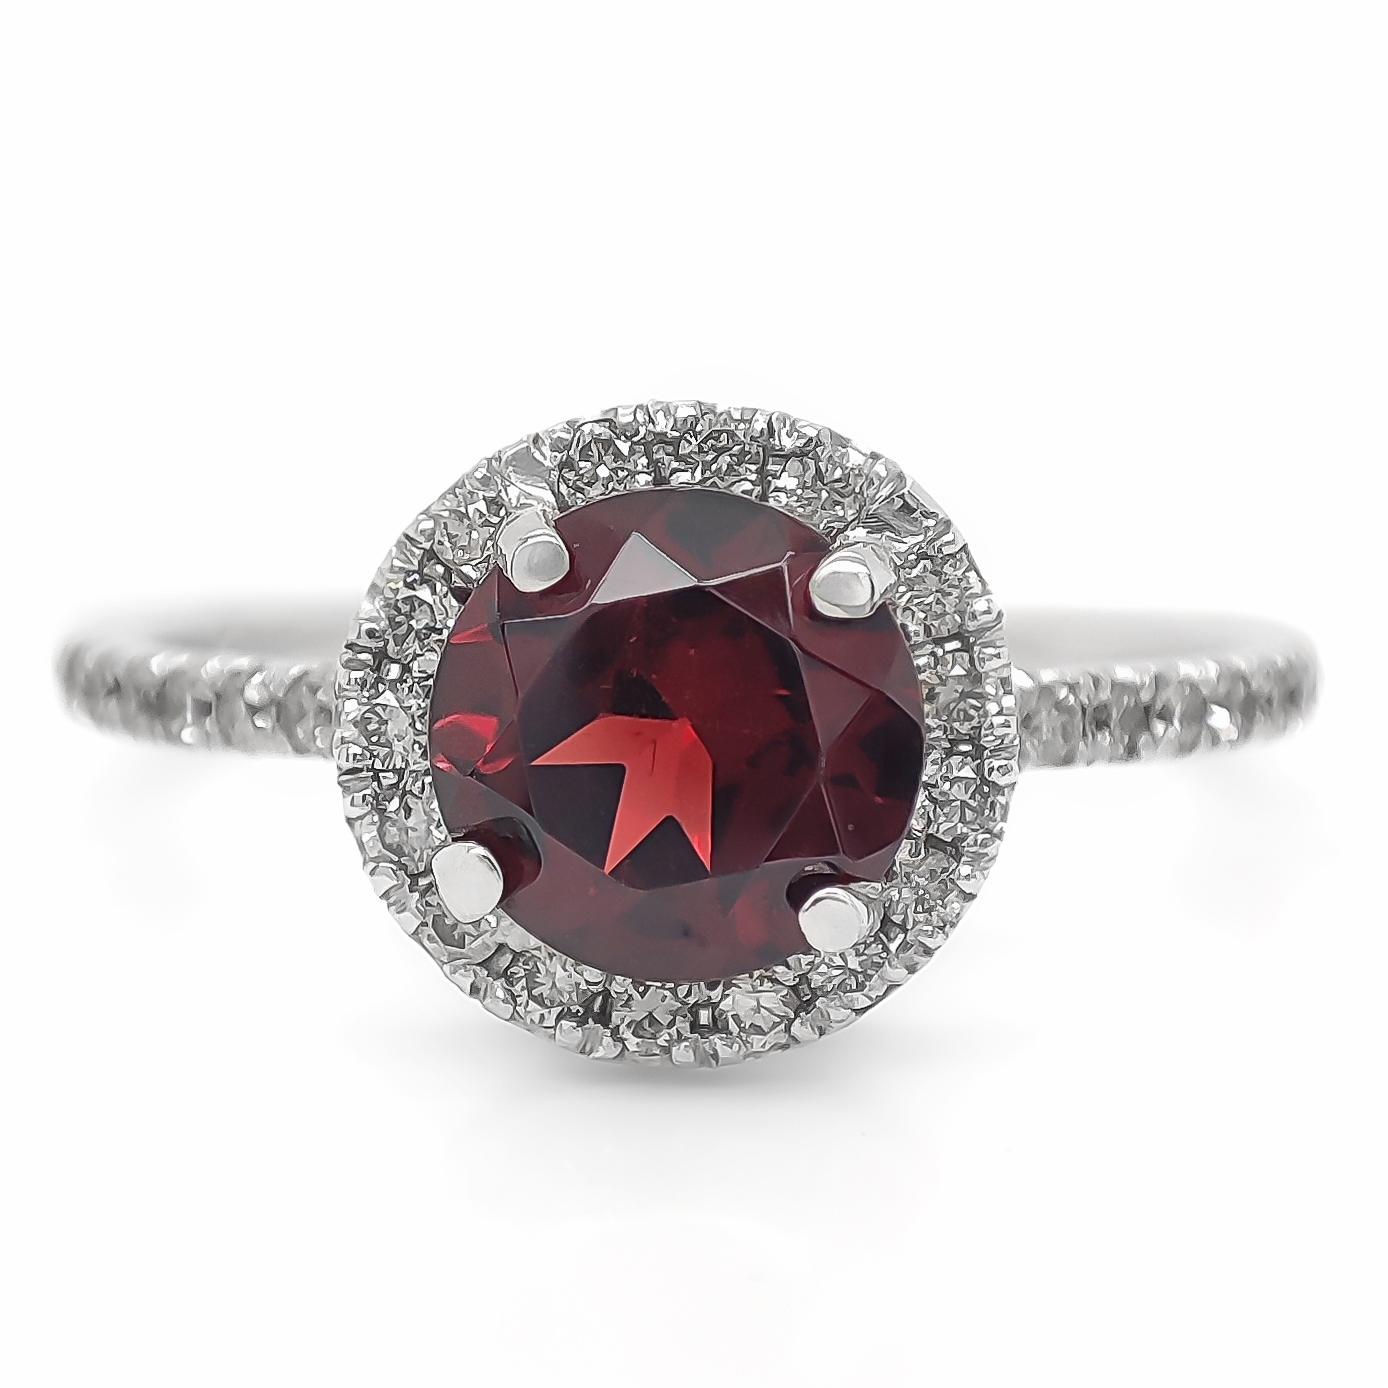 FOR US BUYER NO VAT

This engagement ring is a testament to love and passion. At its heart, it features a captivating 1.10 carat round brilliant red garnet, symbolizing the fiery intensity of your love.

To accentuate the garnet's beauty, the ring